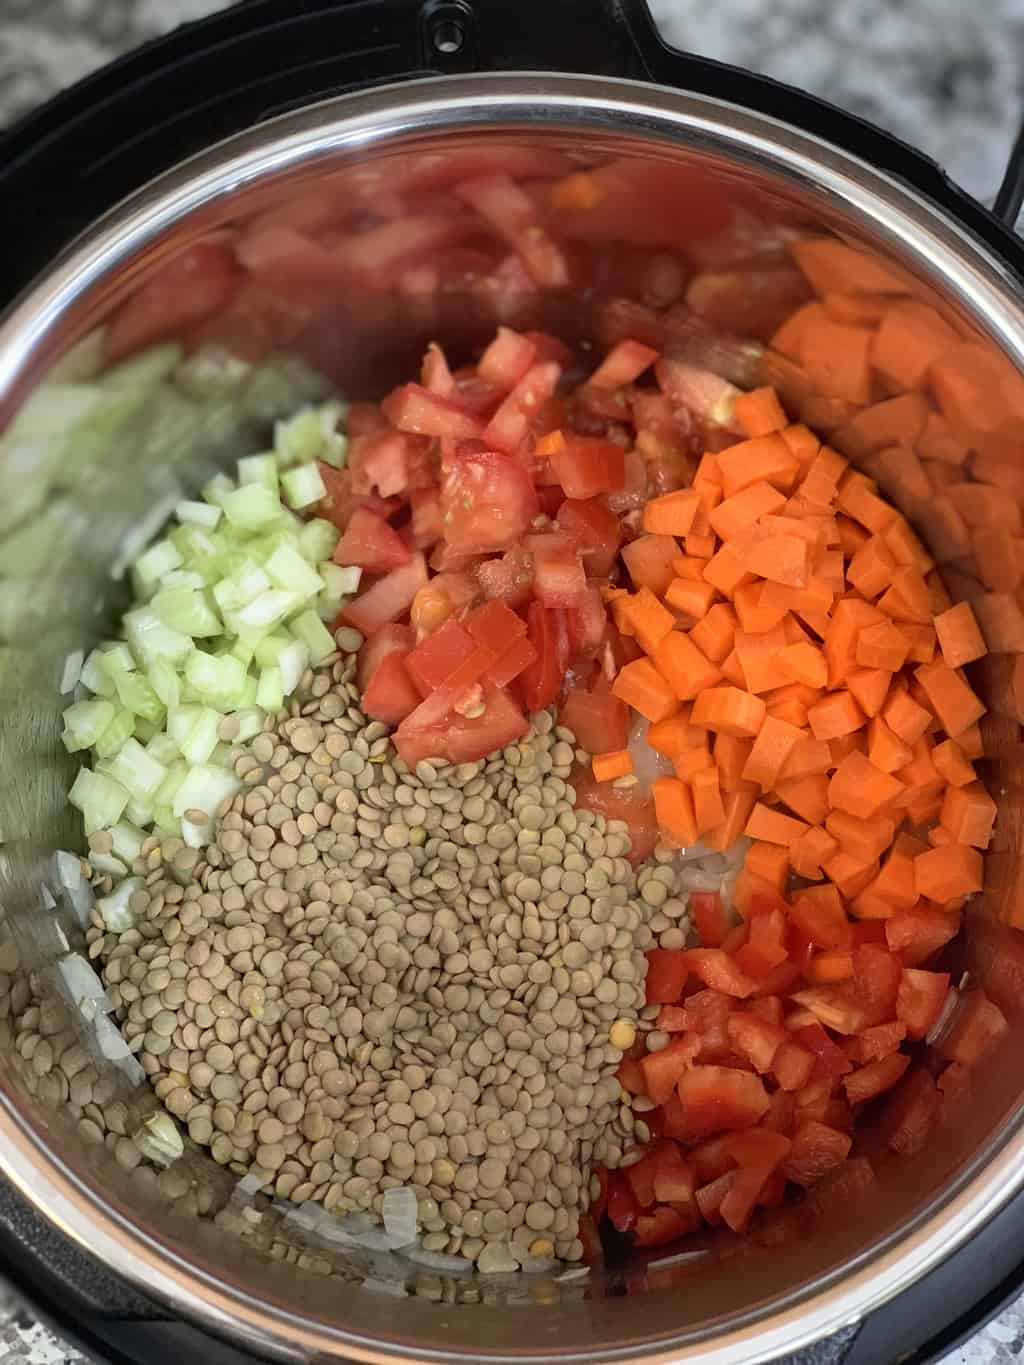 Steps to add vegetables like celery tomatoes carrots bell peppers and green lentils